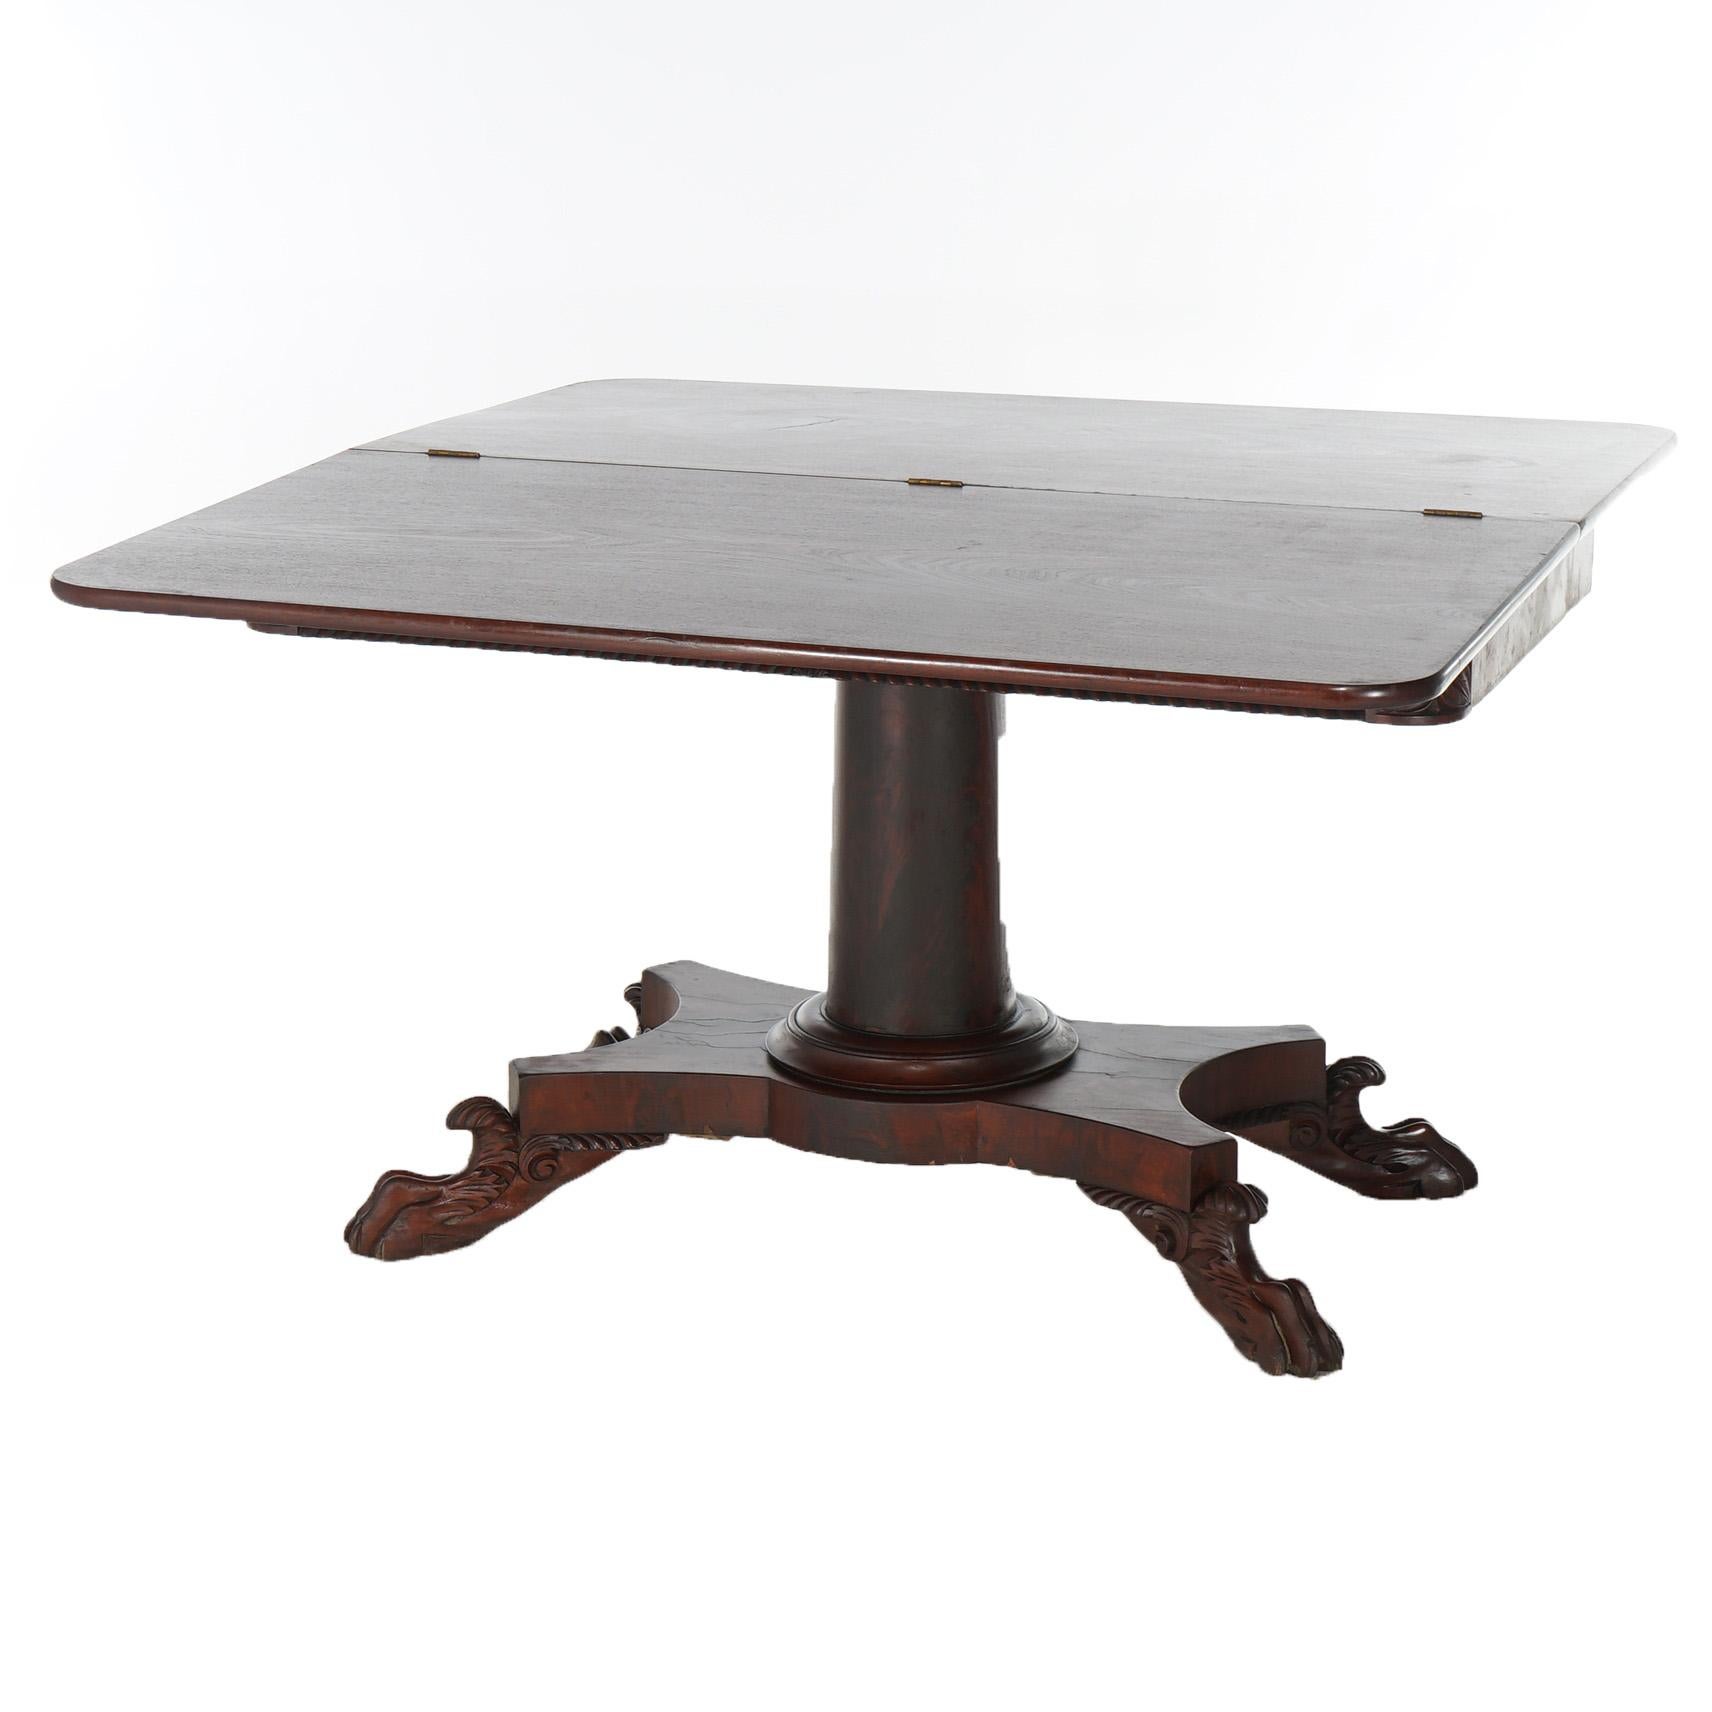 19th Century Antique American Empire Flame Mahogany Card Table Circa 1840 For Sale